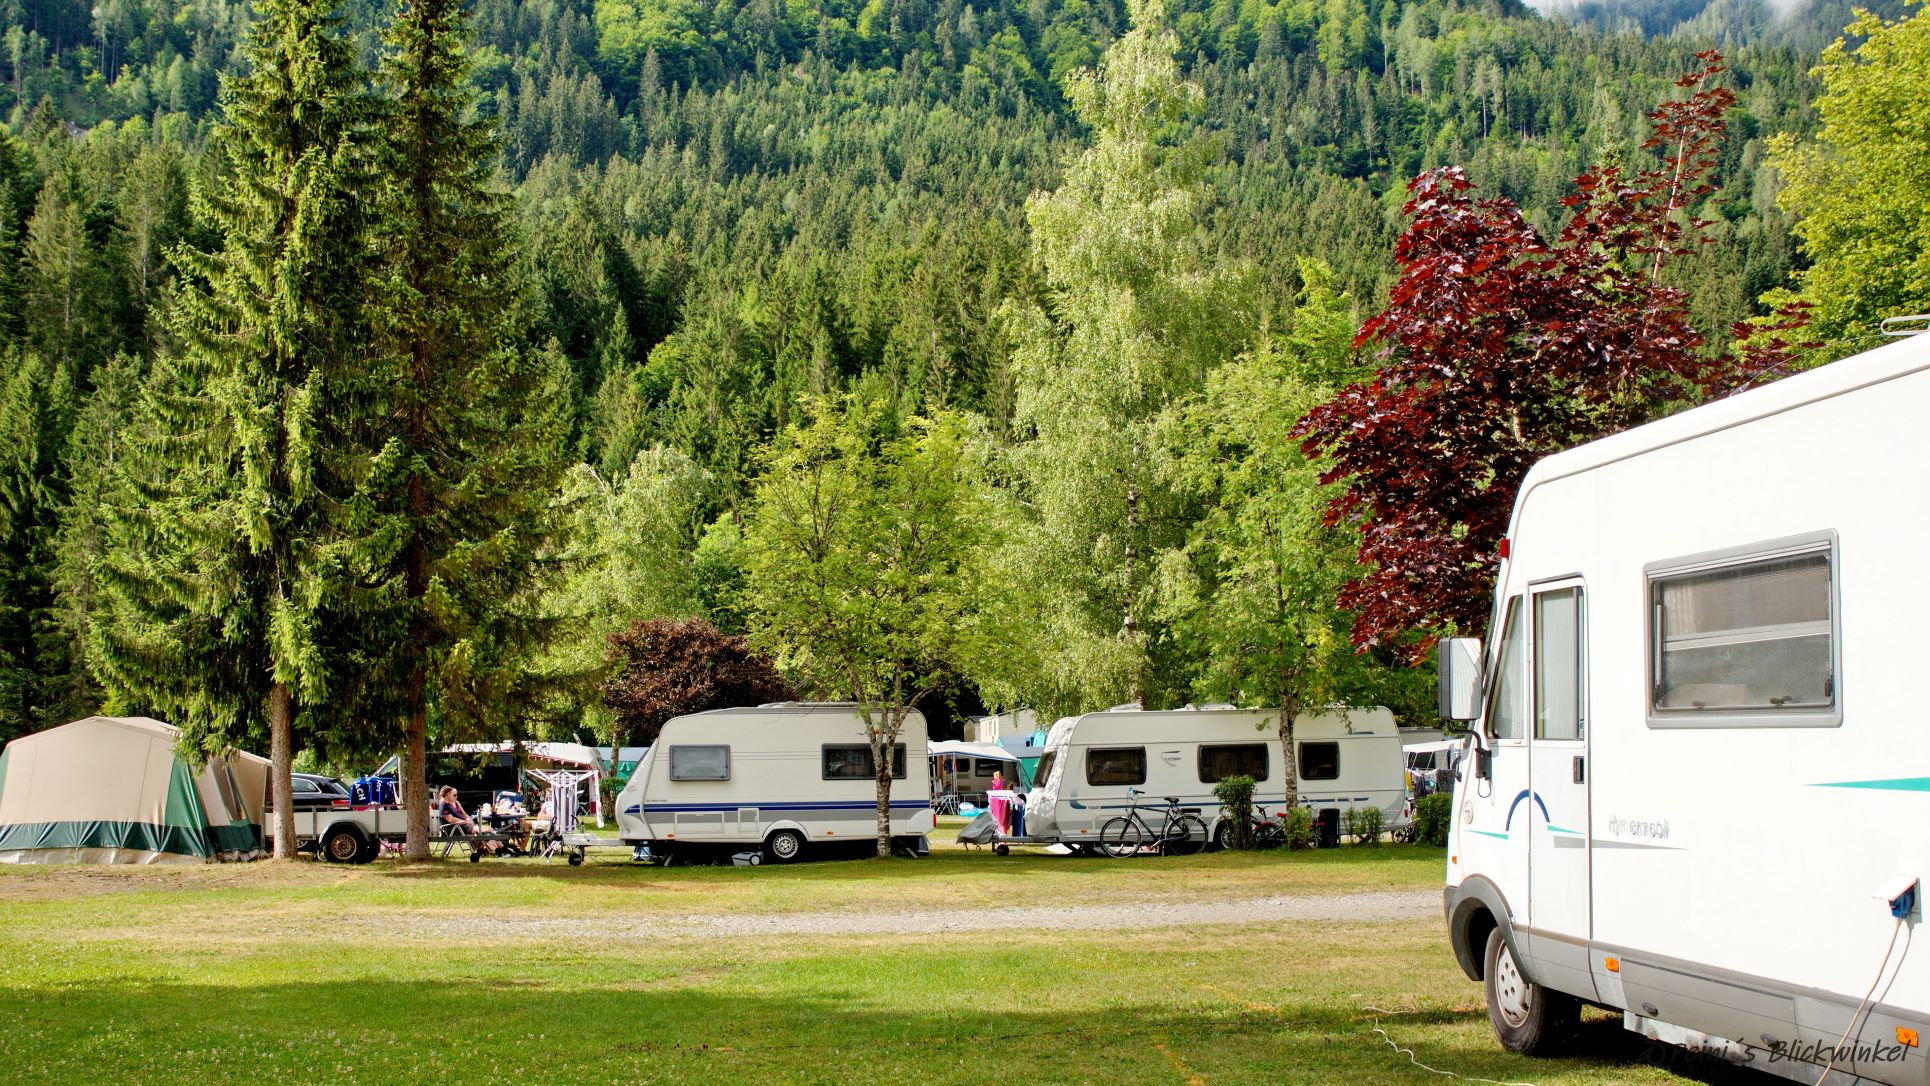 Emplacement - Emplacement Standard "M" - Camping Waldbad, Dellach im Drautal